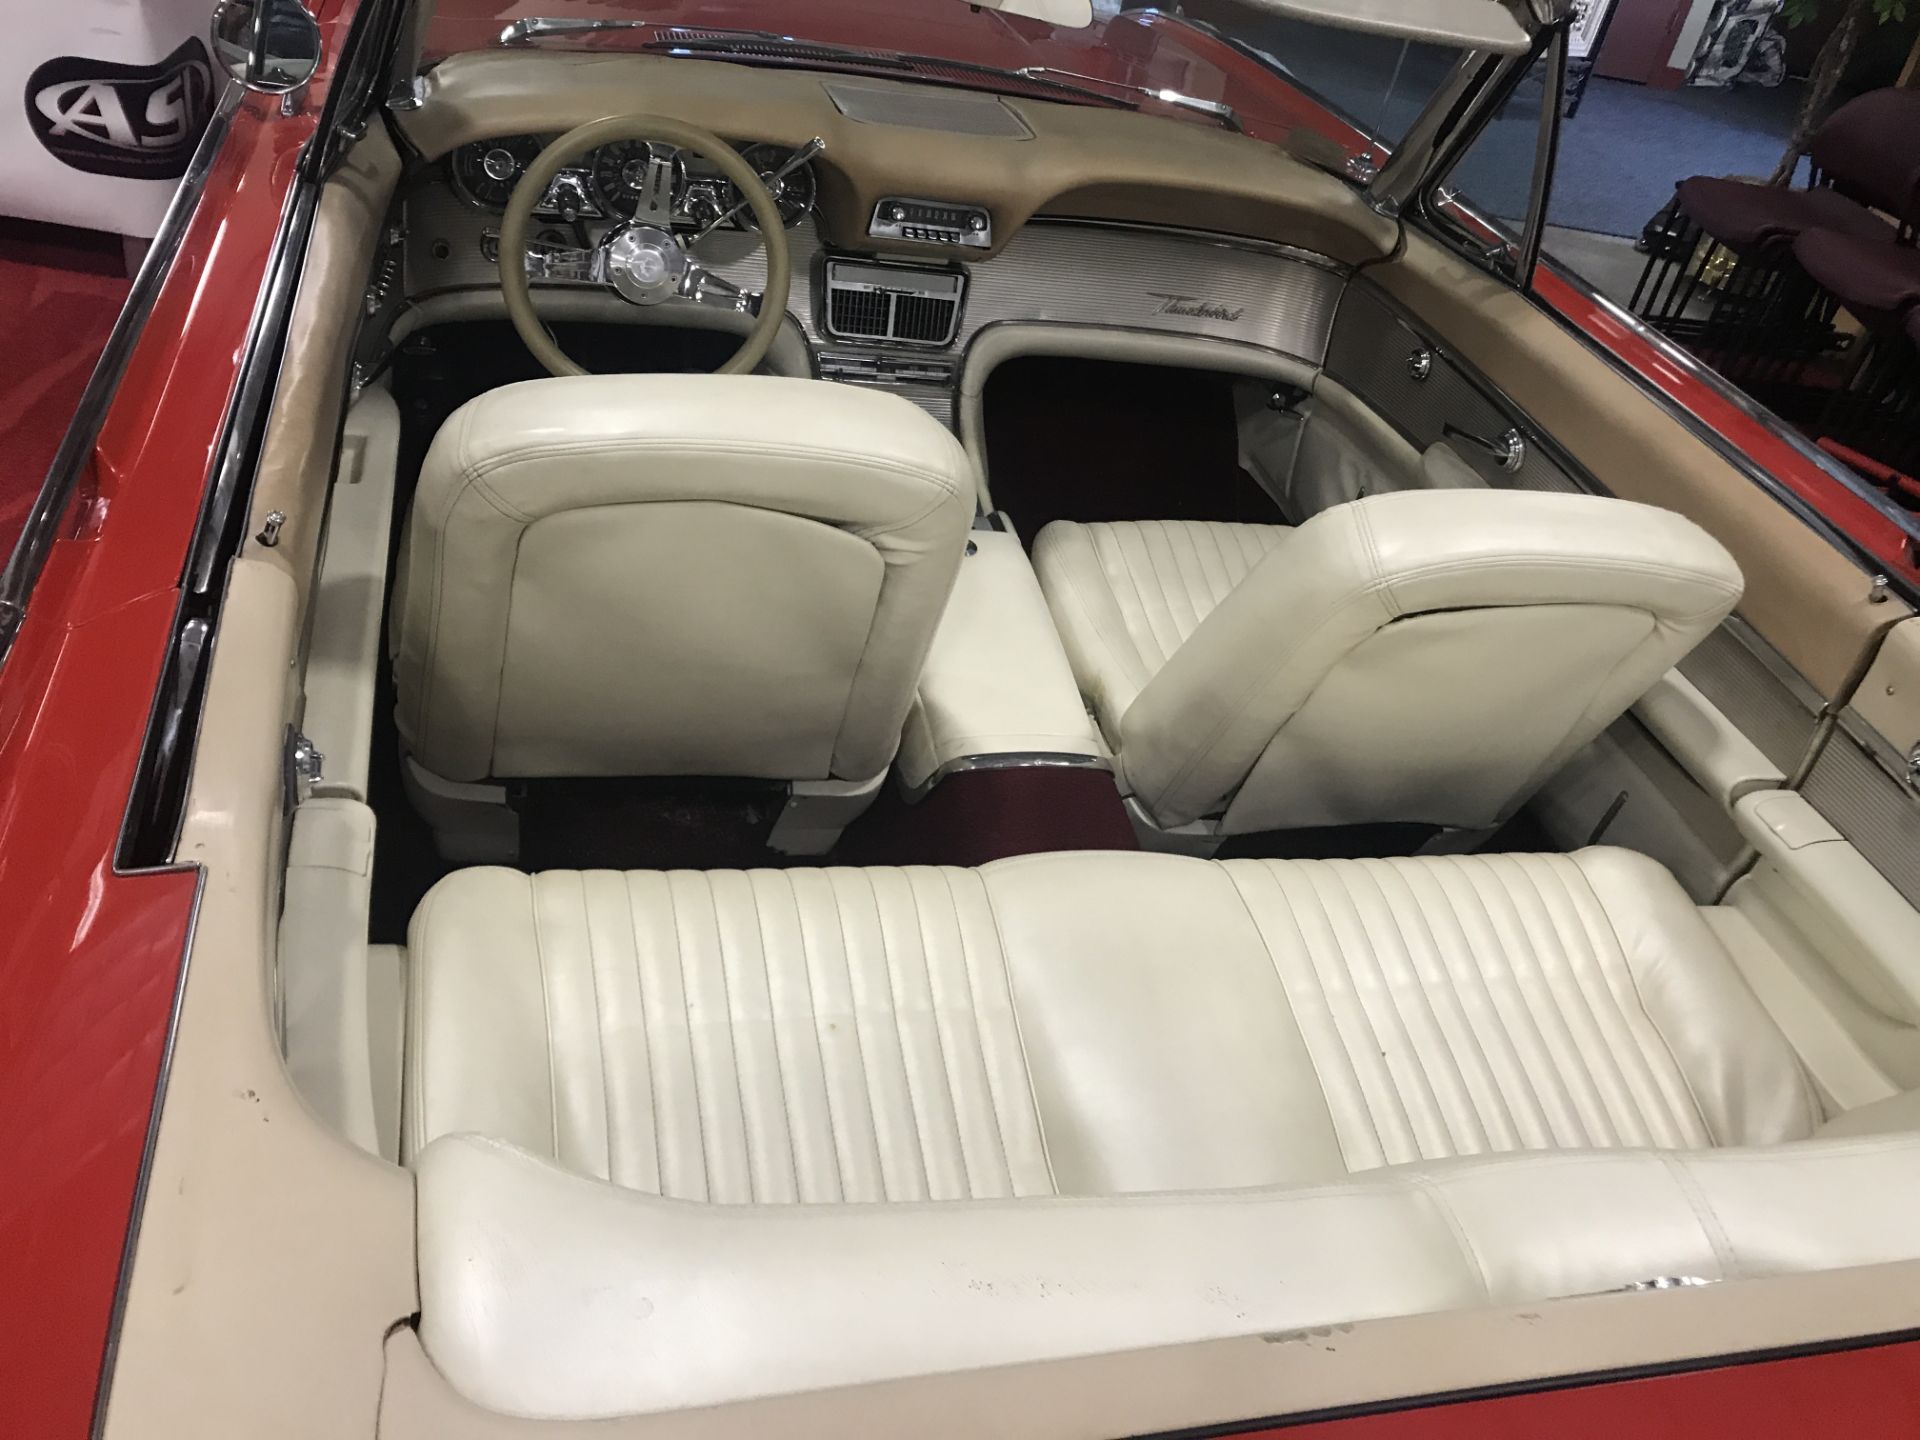 1961 CLASSIC FORD THUNDERBIRD CONVERTIBLE - Image 6 of 13